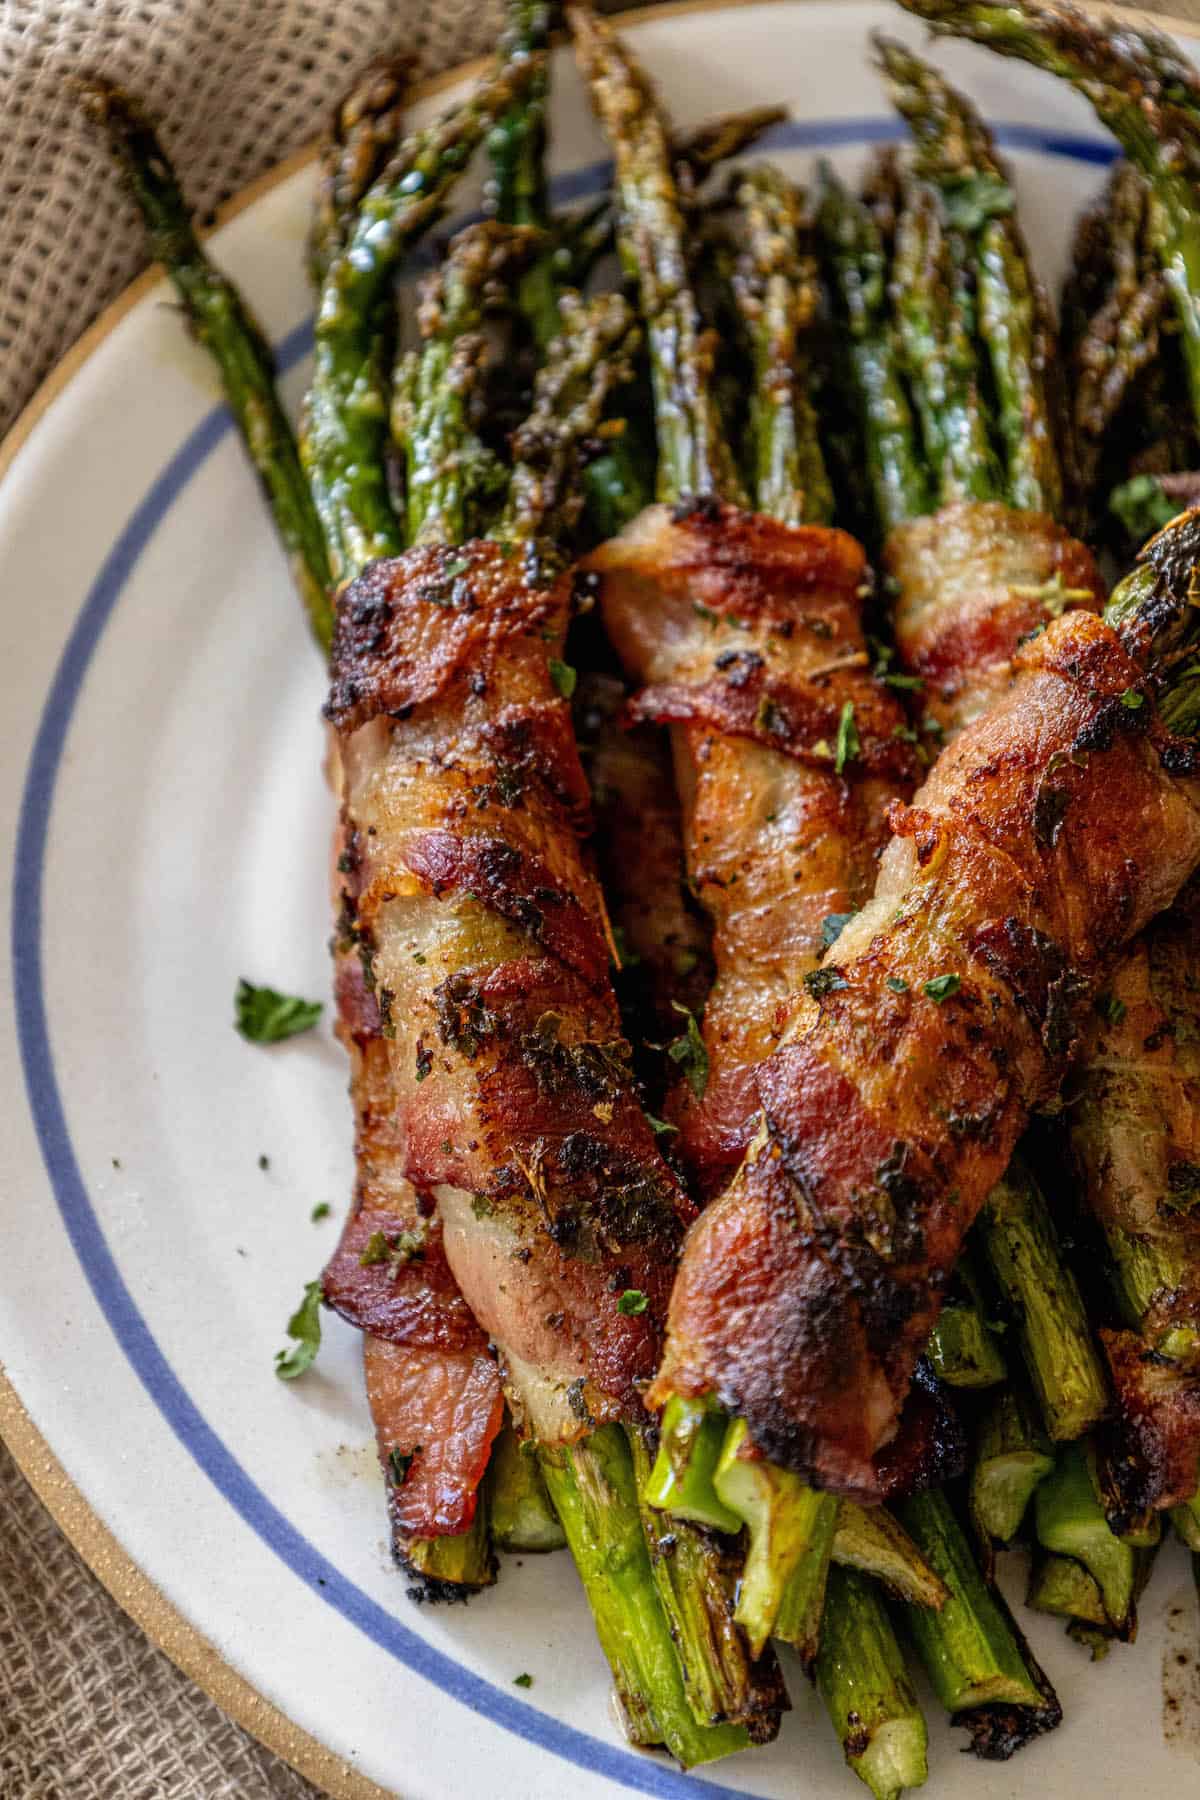 Bacon wrapped asparagus on a plate with garlic-infused flavor.